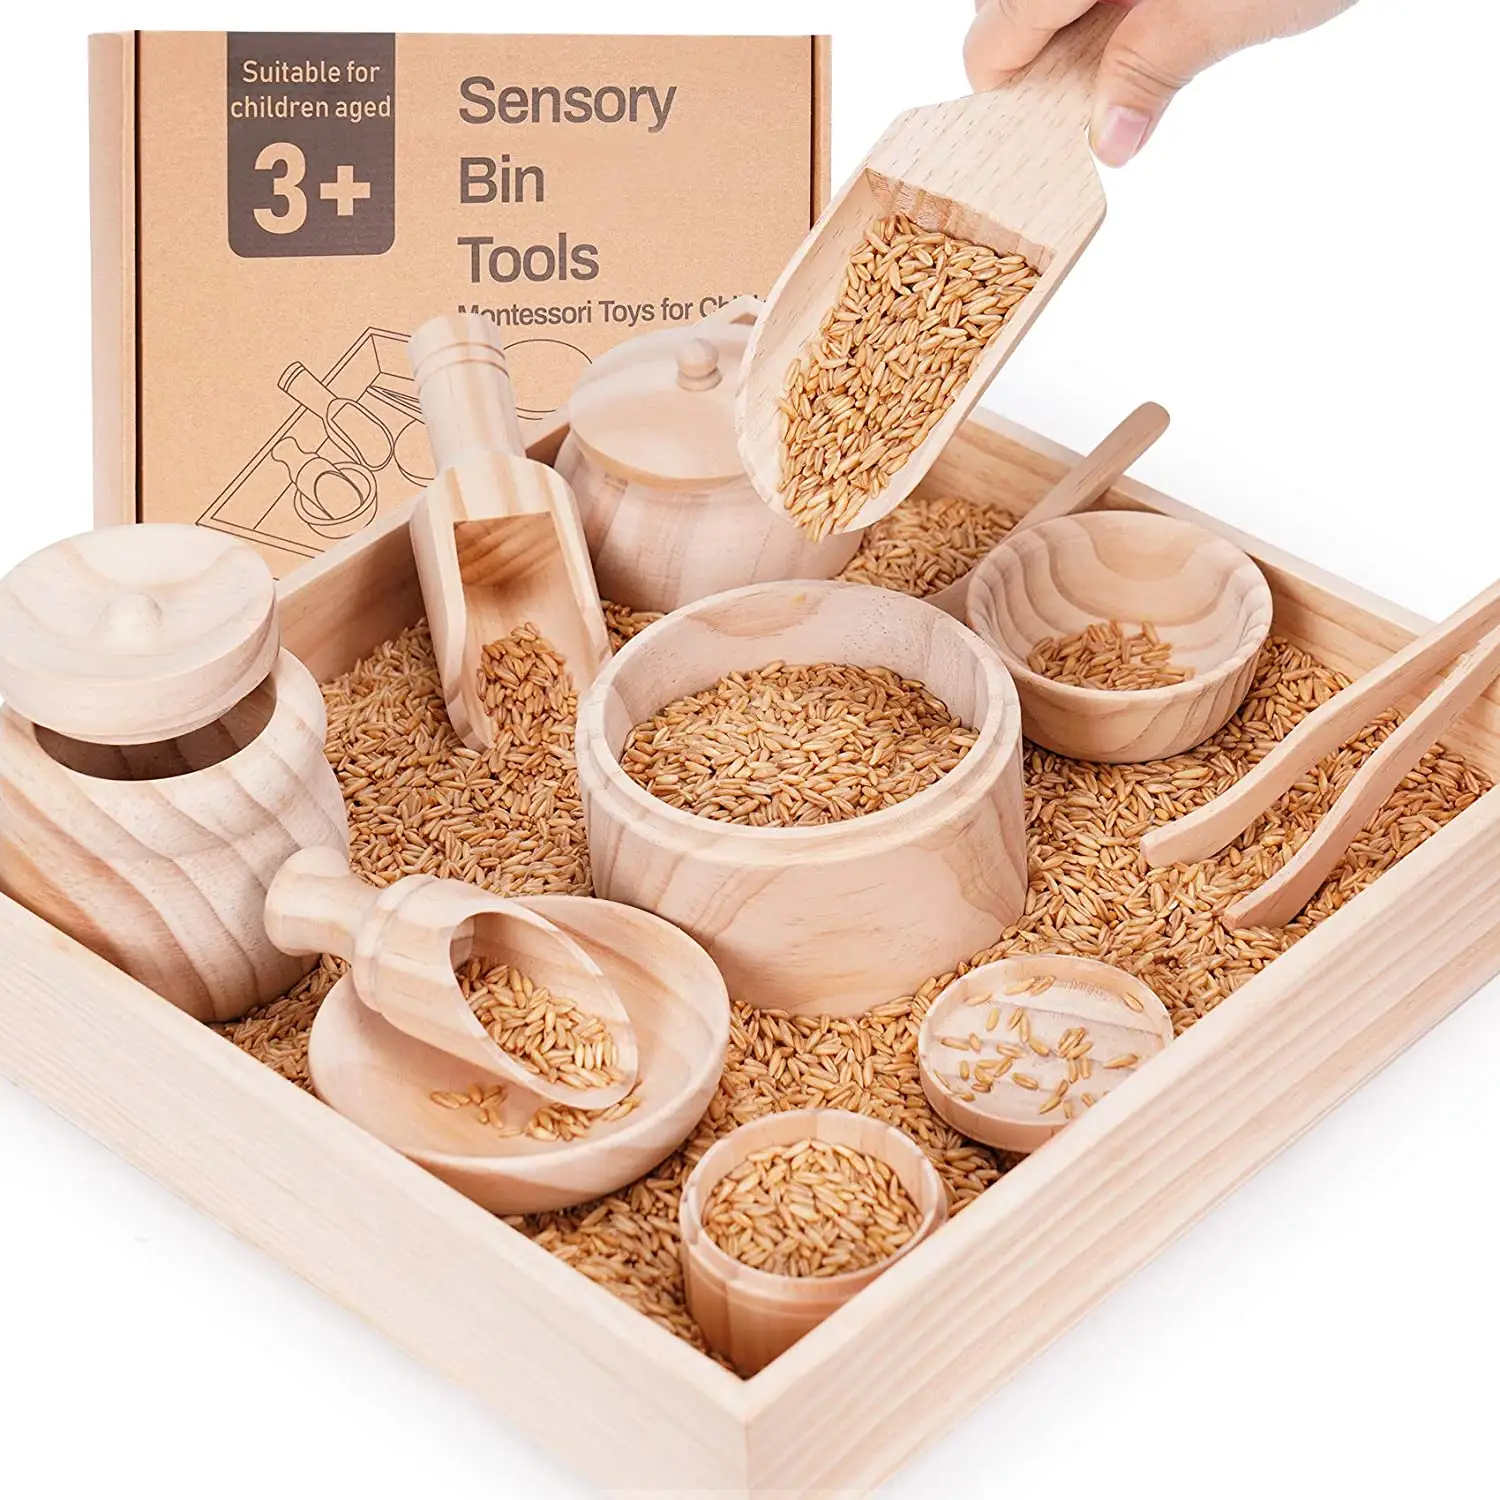 Montessori material wooden Educational DIY Kitchen Toys Children's Sensory Bin Tools with Wooden Box